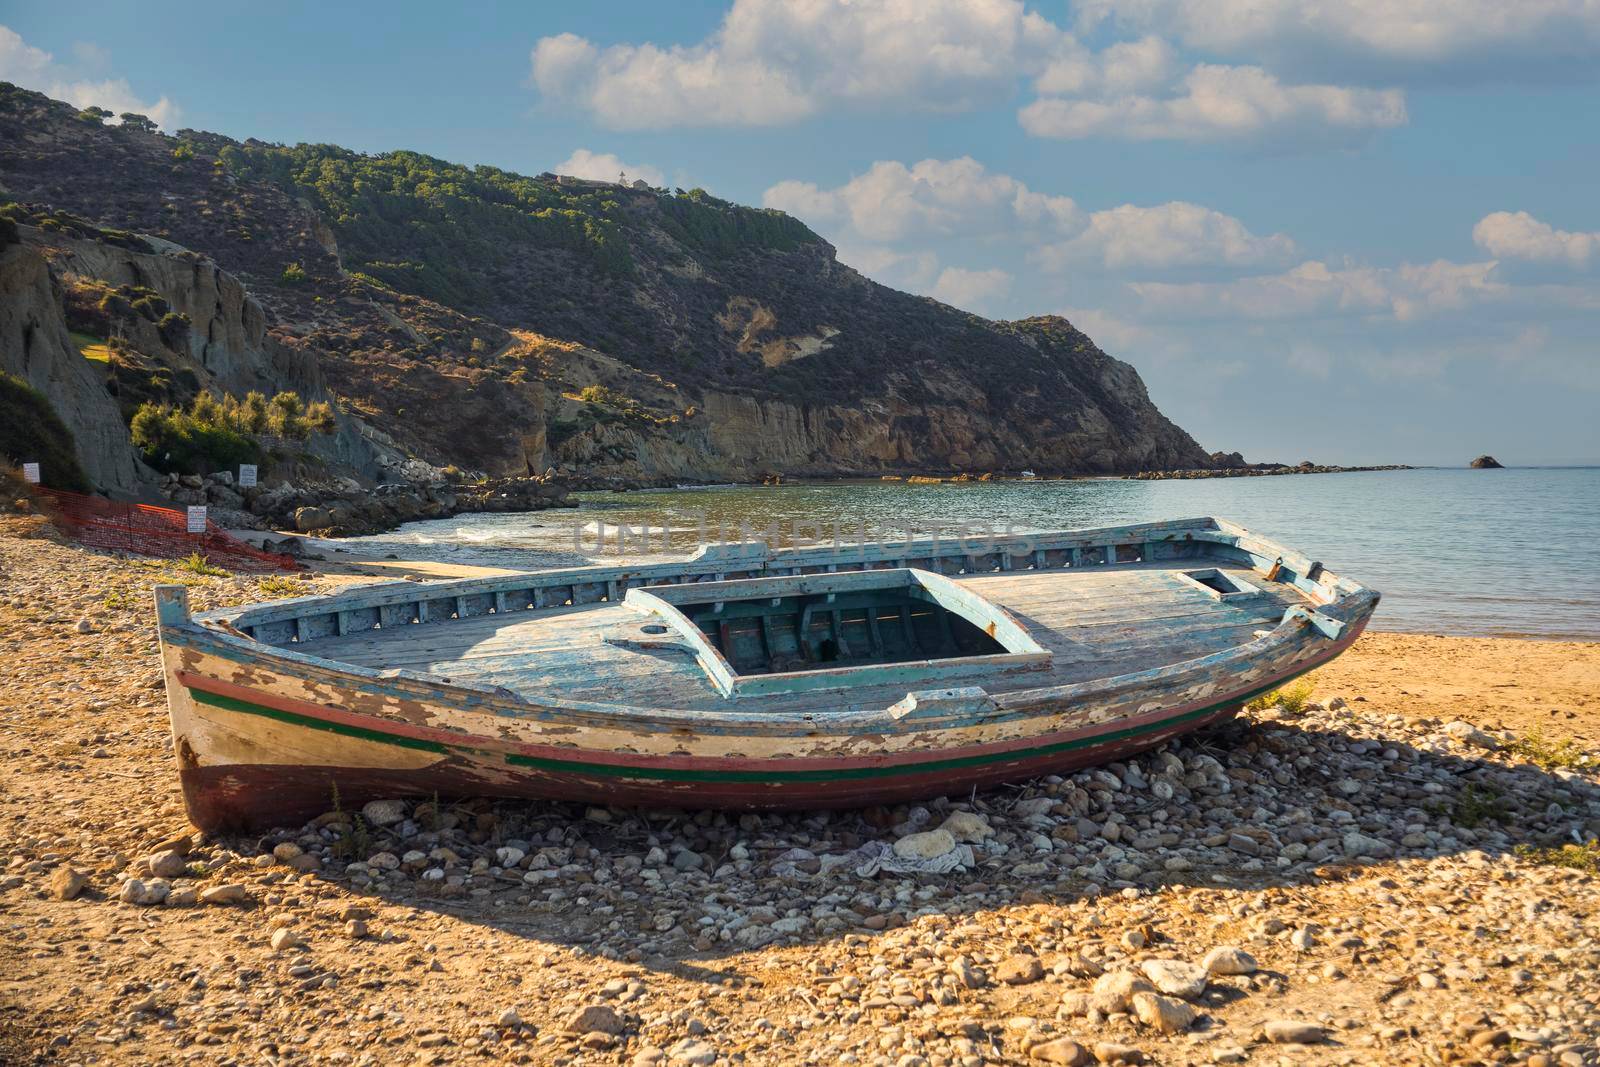 A Broken migrant boat stranded on the beach of the Agrigento coast